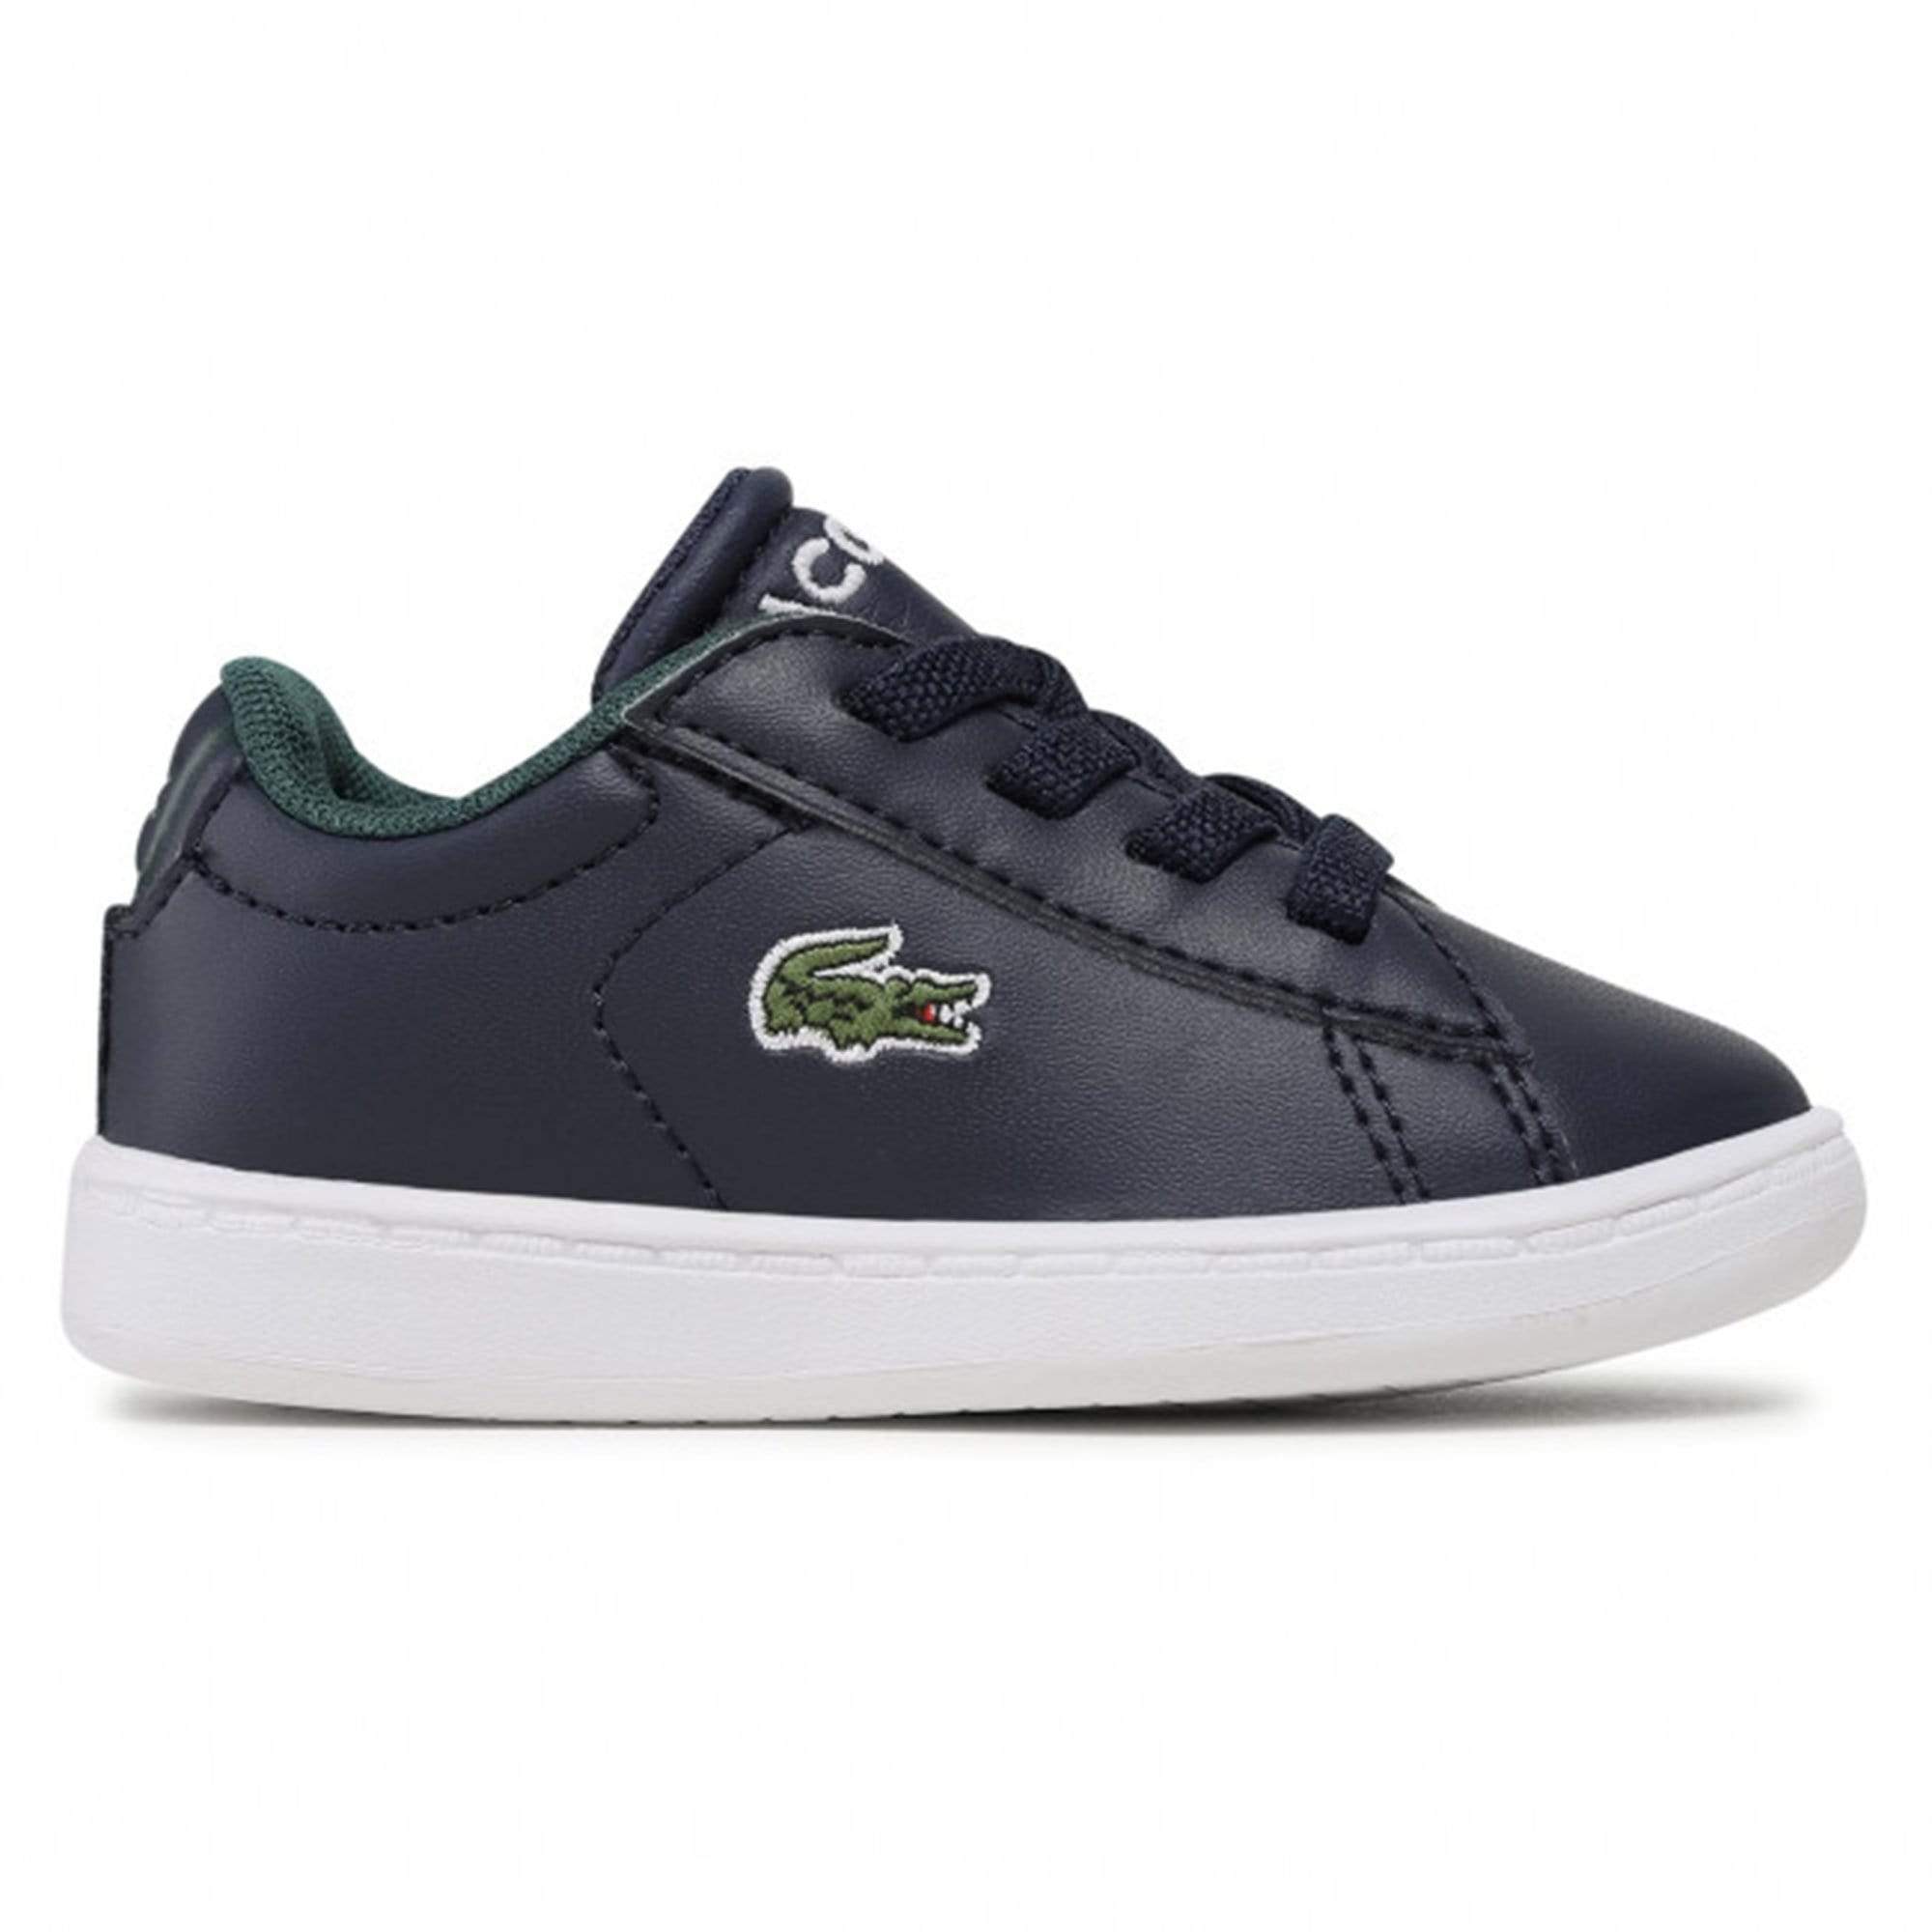 Lacoste - Shoes - Boys Carnaby Evo 0721 1 Sui Navy